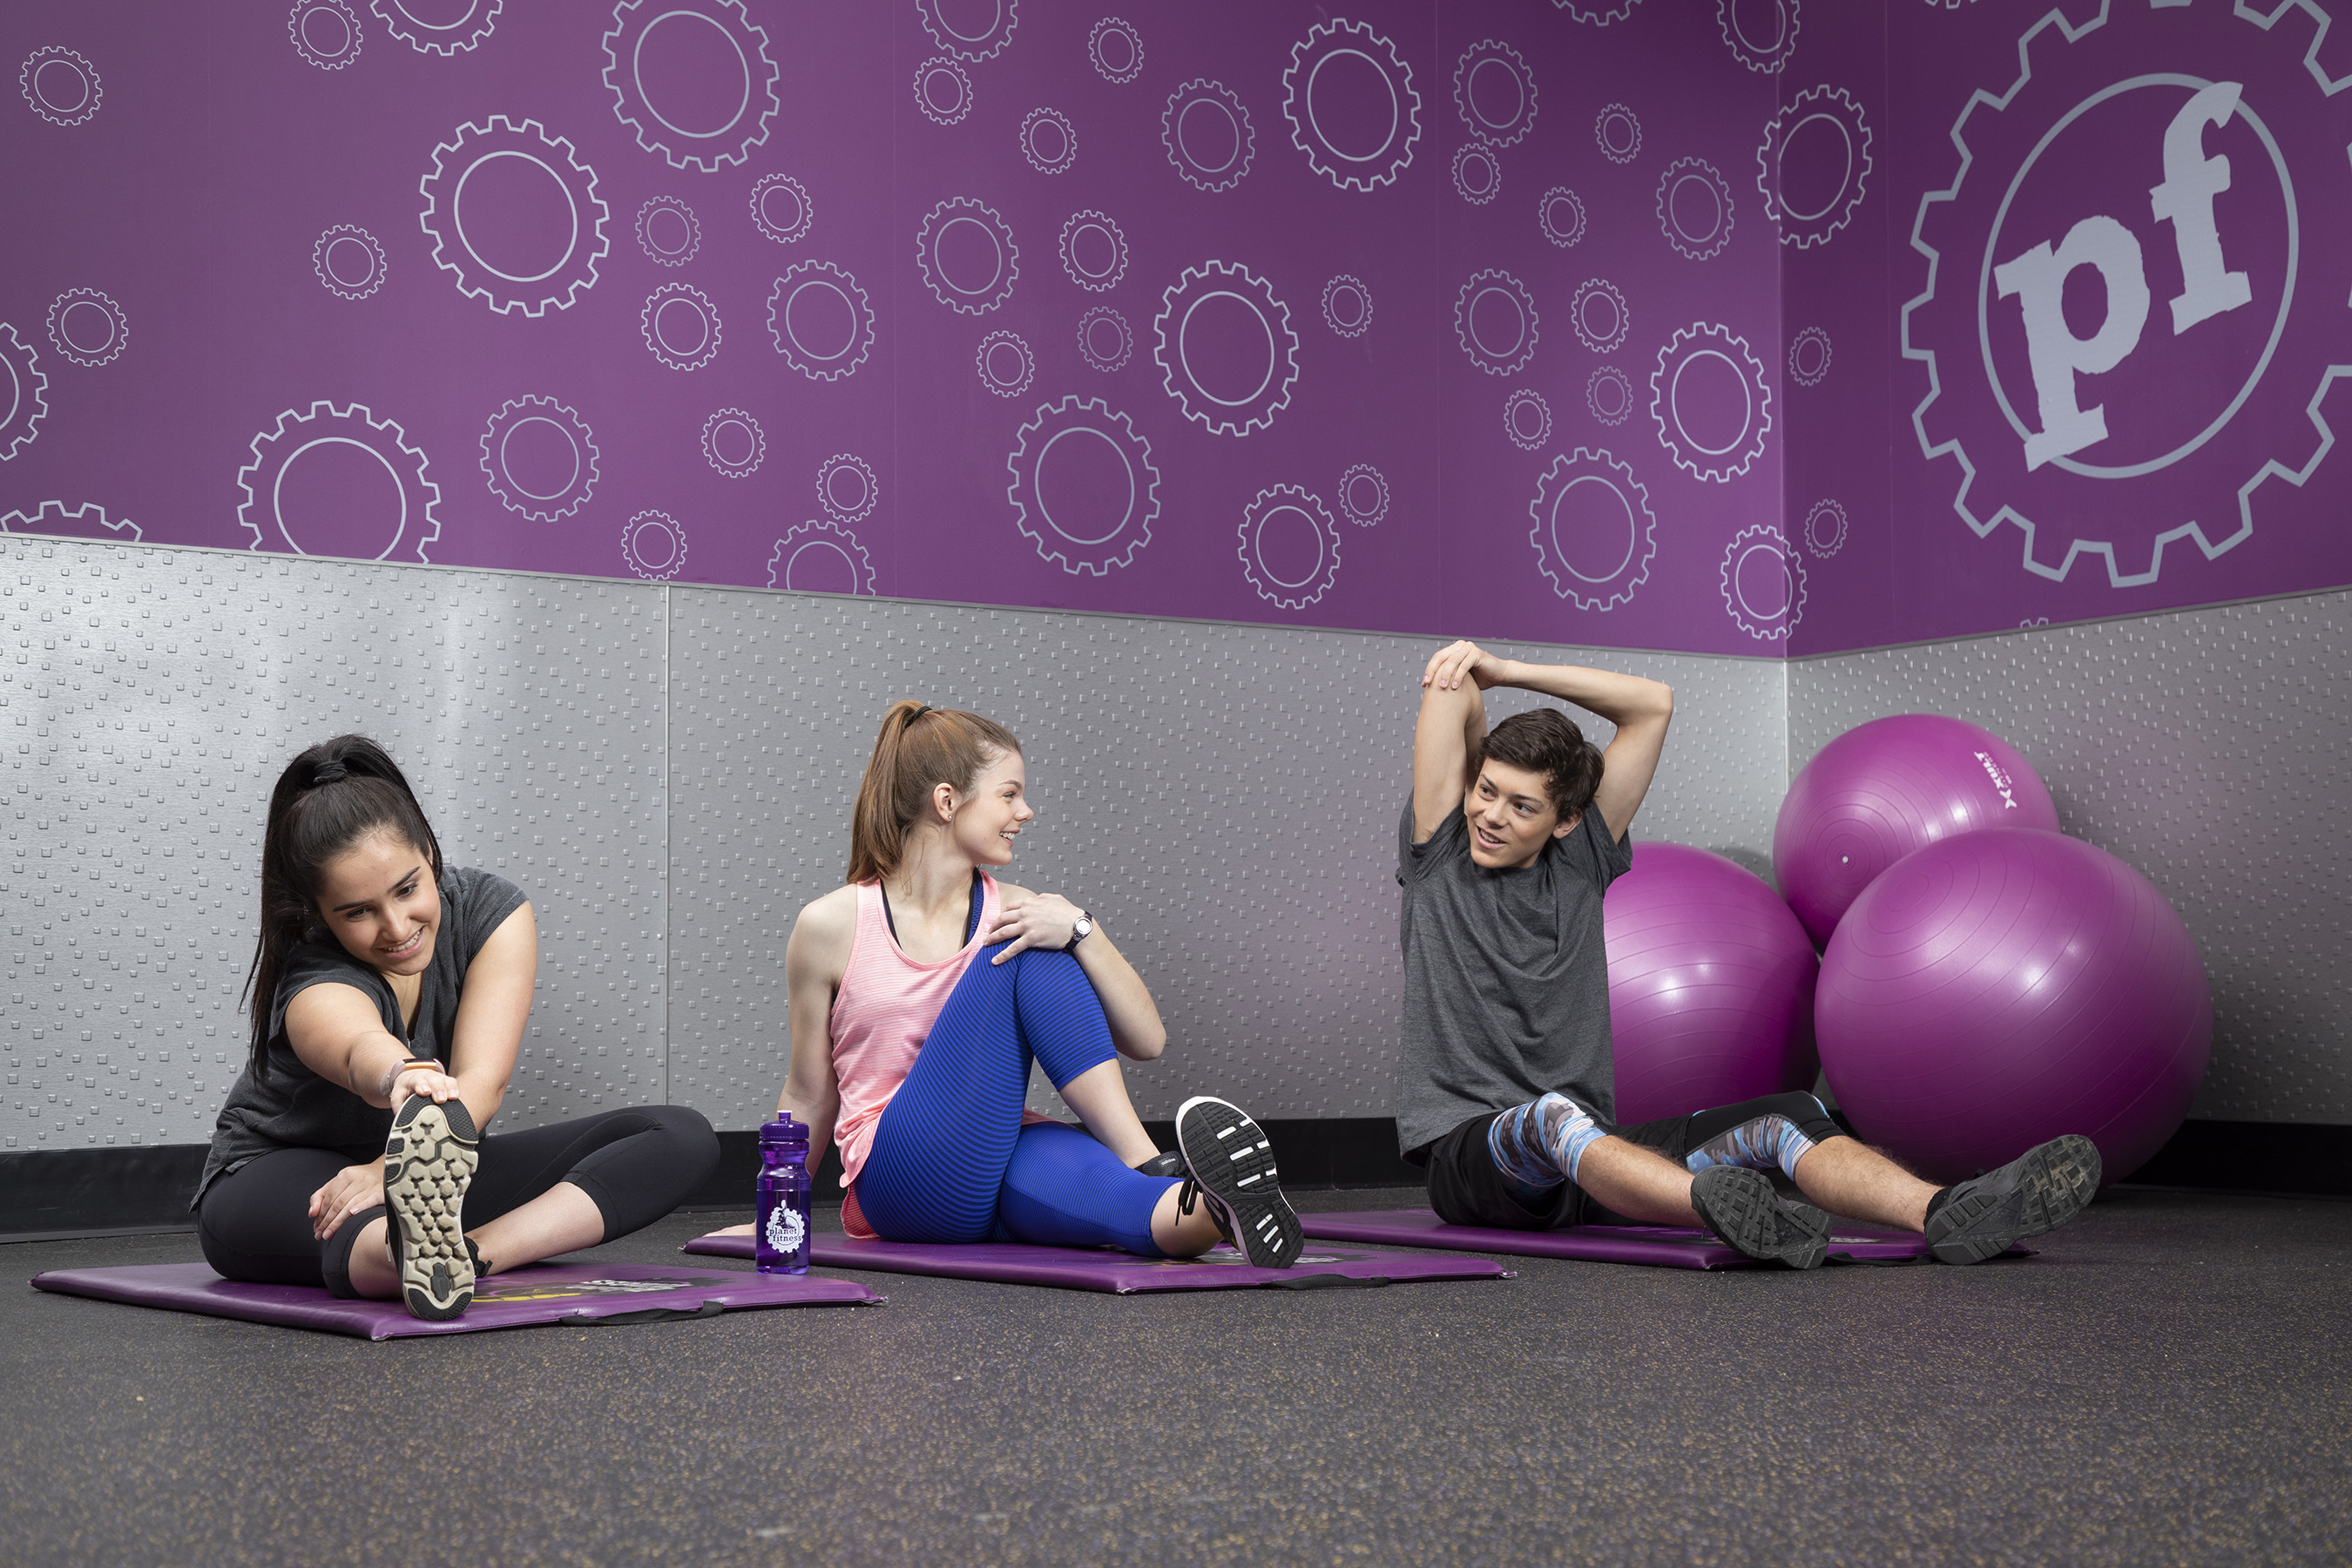 Planet Fitness - home of the Judgement Free Zone® - invites high school teenagers ages 15 – 18 to work out for free at any of its more than 1,700 Planet Fitness locations throughout the United States from May 15 through September 1 as part of the nationwide Teen Summer Challenge initiative. For more information, including how to sign up beginning May 15, visit PlanetFitness.com/TeenSummerChallenge.